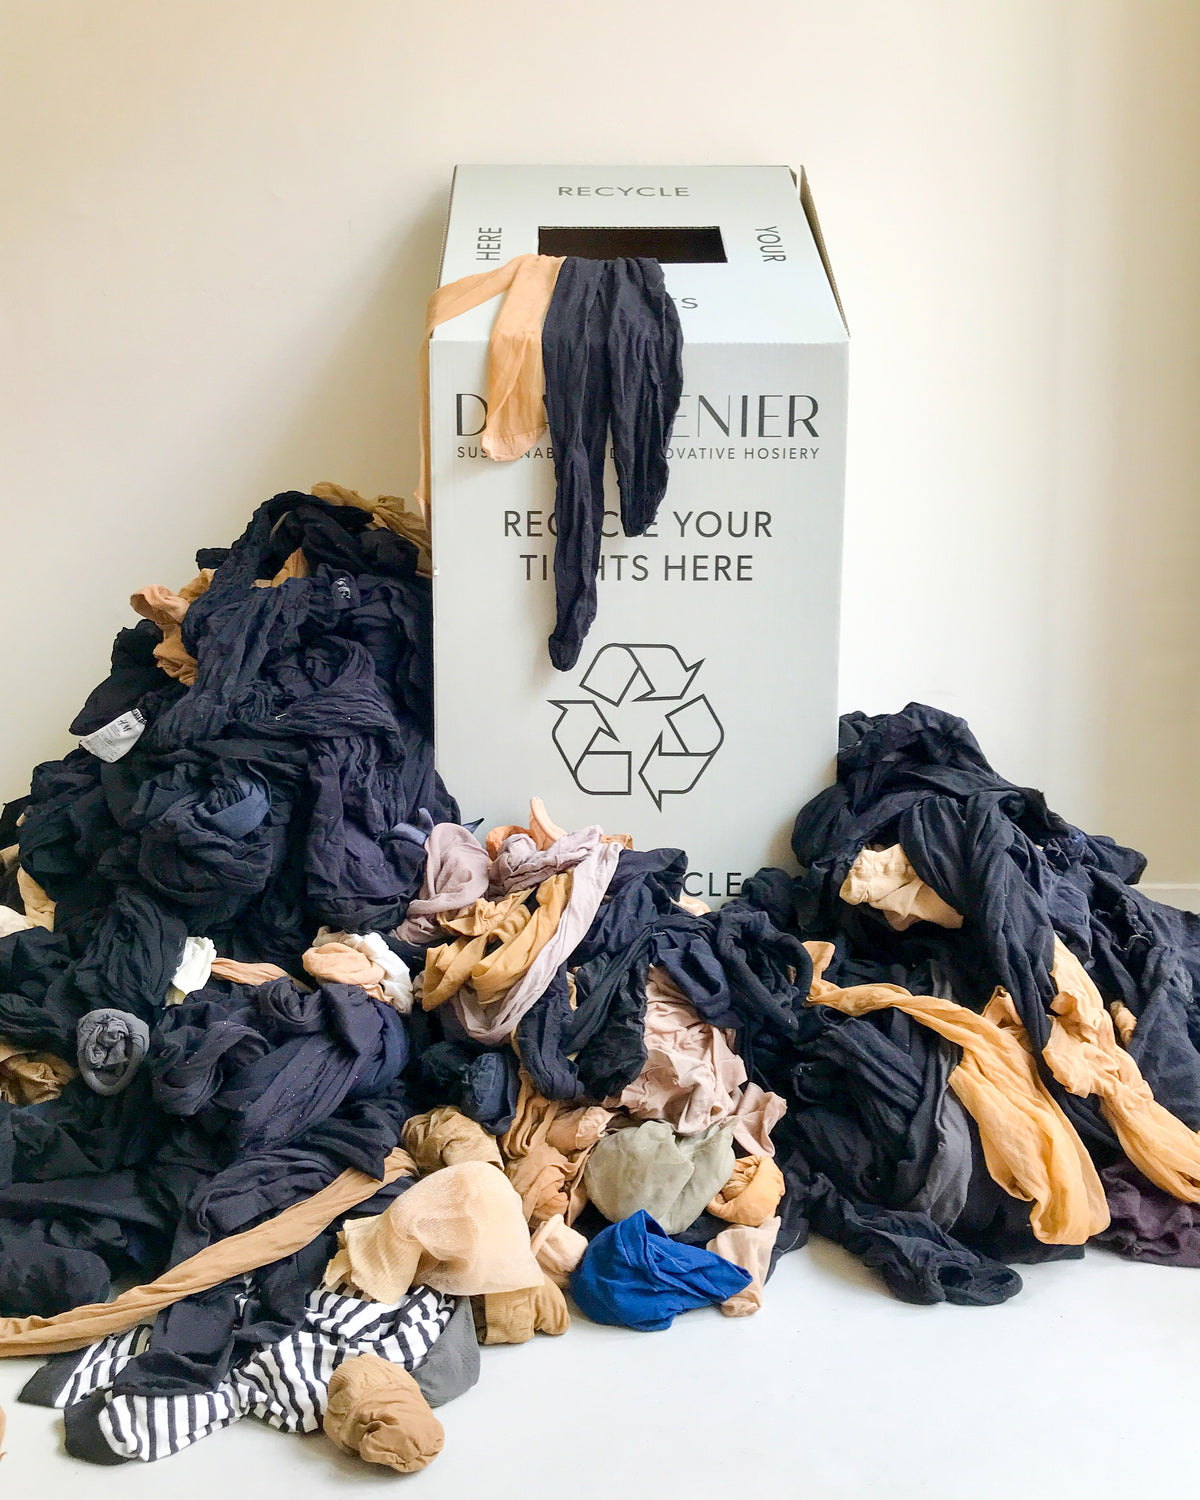 Tights Recycling Scheme Launched By Snag Tights